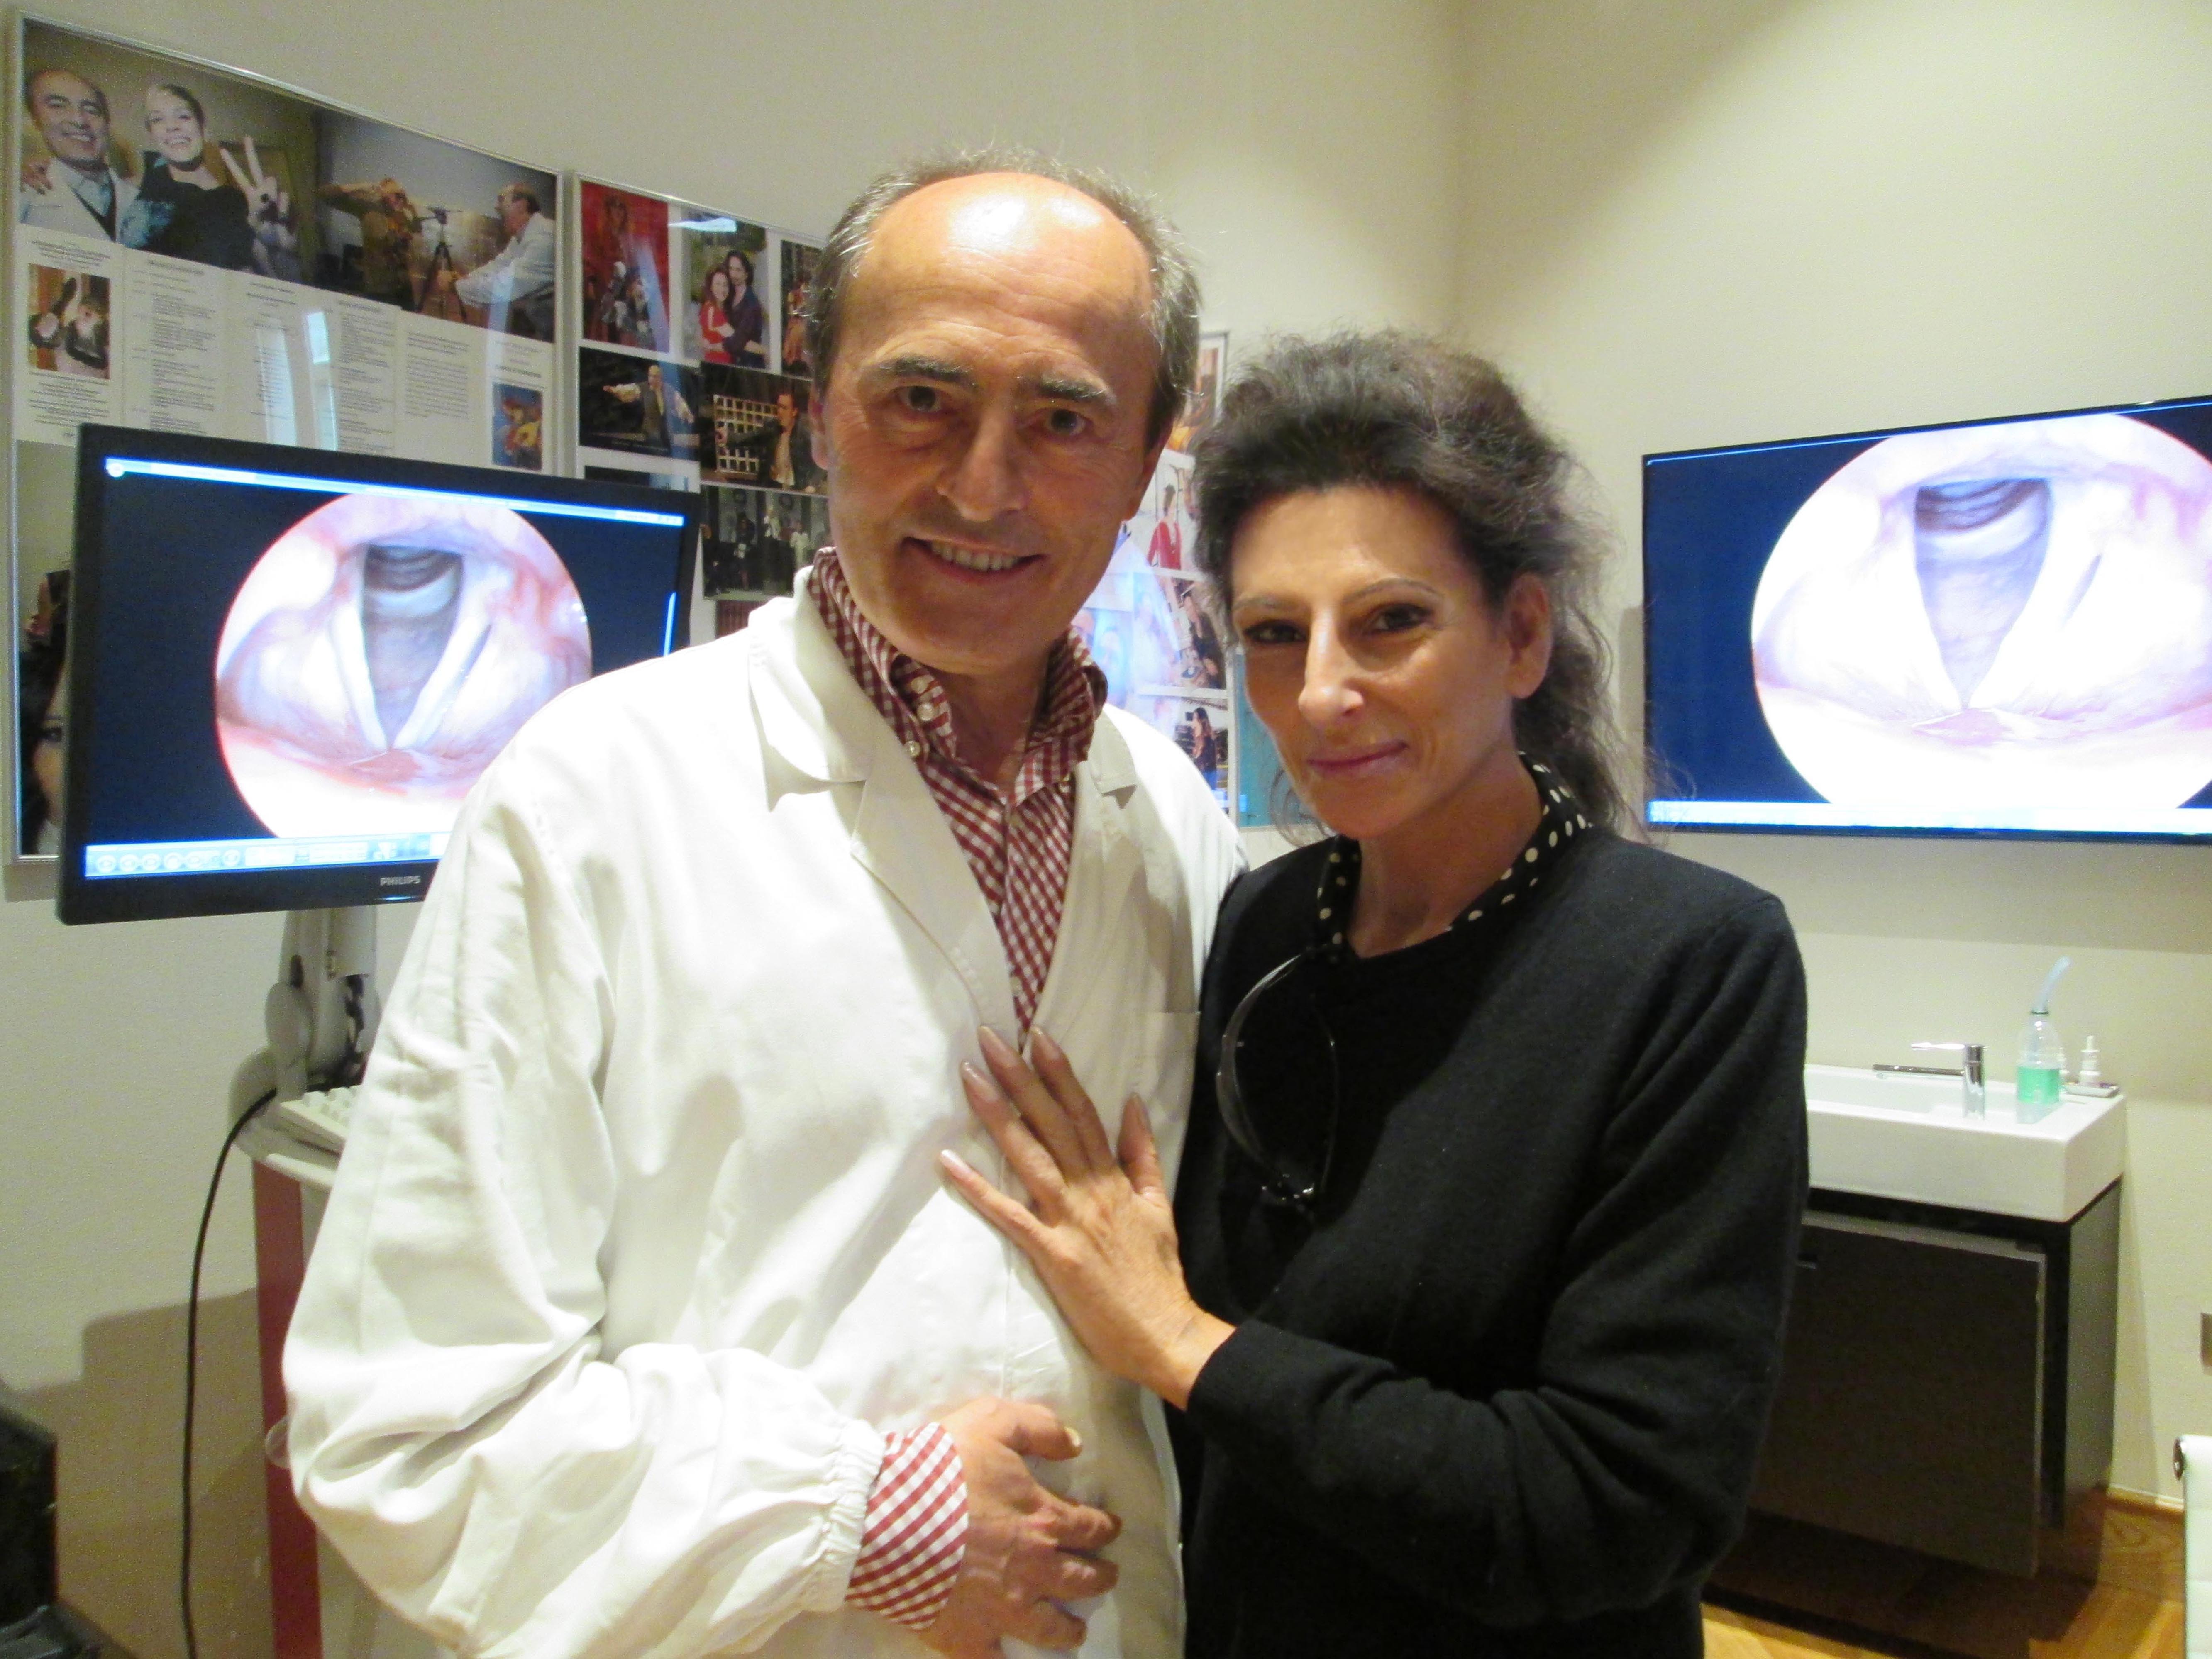 Lucia Aliberti with the famous Dr.Franco Fussi⚘Ravenna⚘Voice Specialist⚘Friend of Singers⚘:http://www.luciaaliberti.it #luciaaliberti #francofussi #ravenna